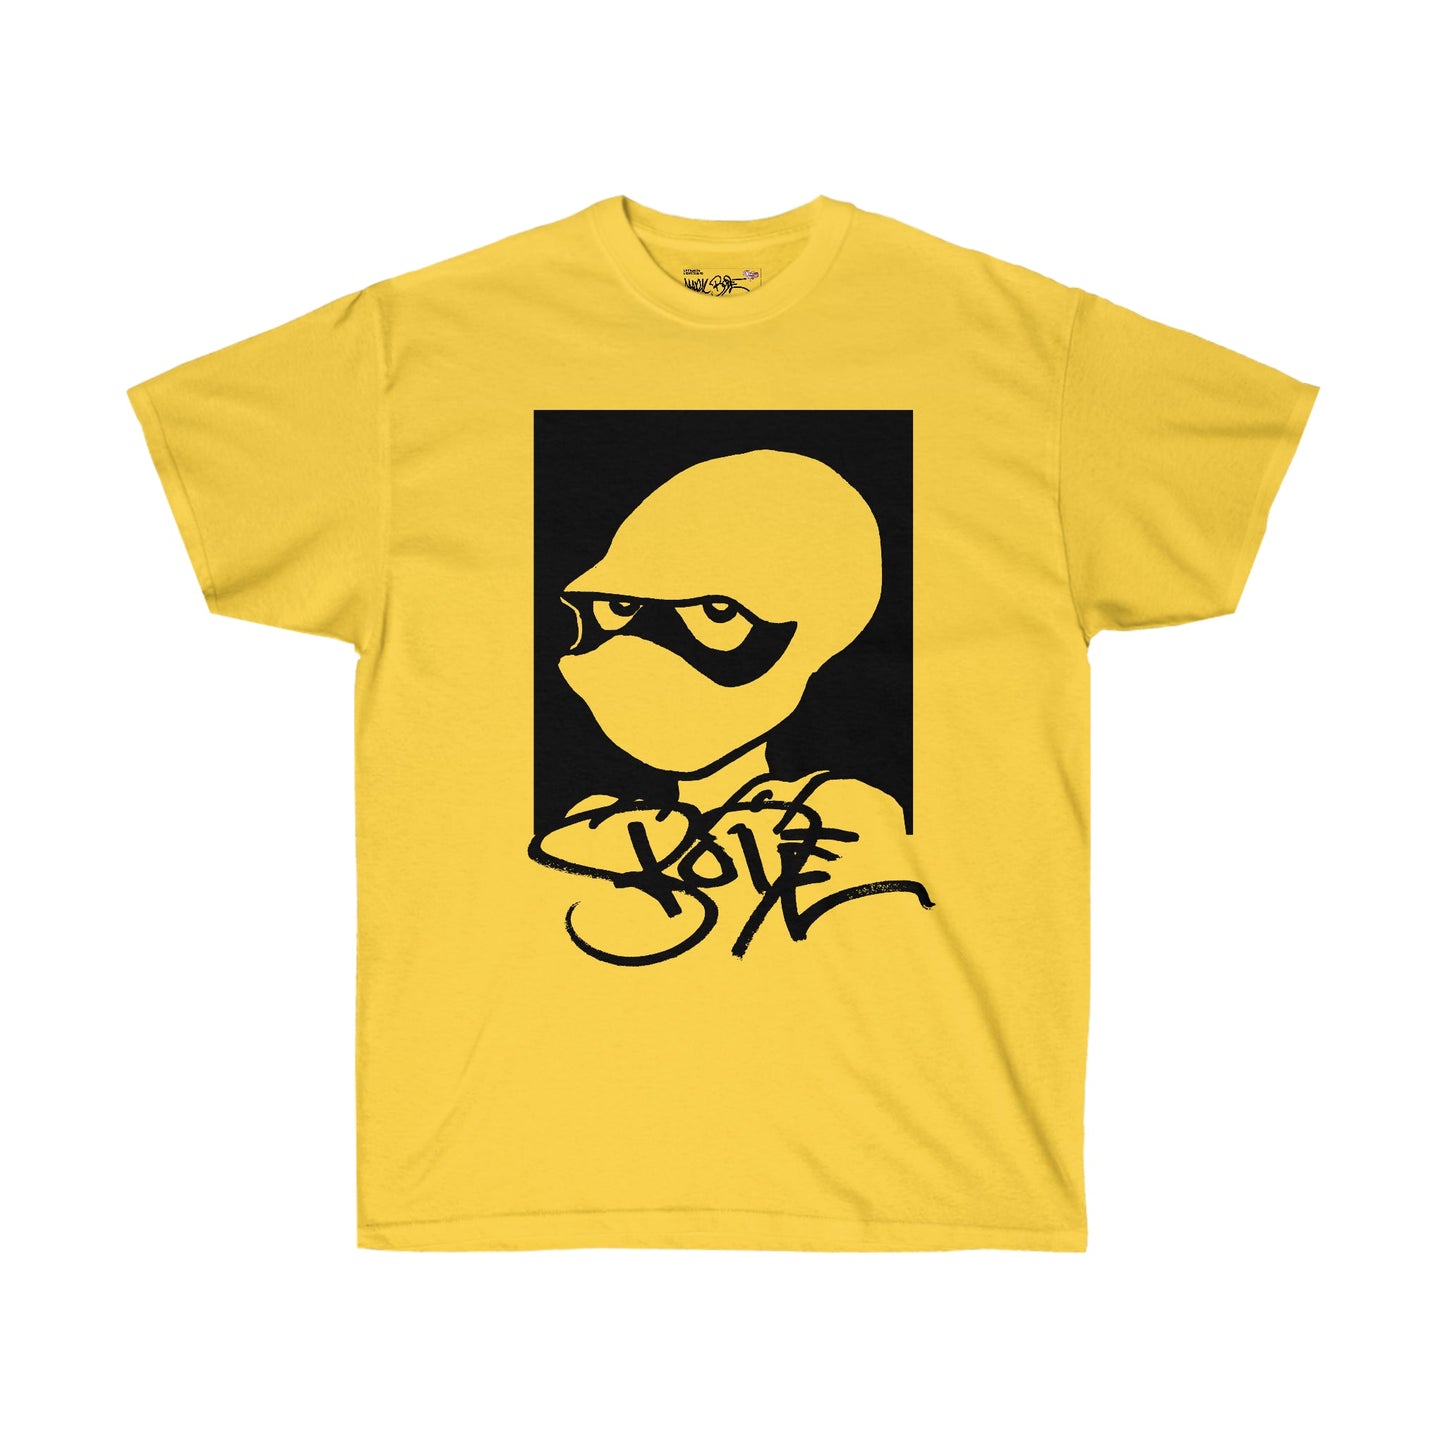 Bode Cobalt 60 Limited Edition Tee Gold